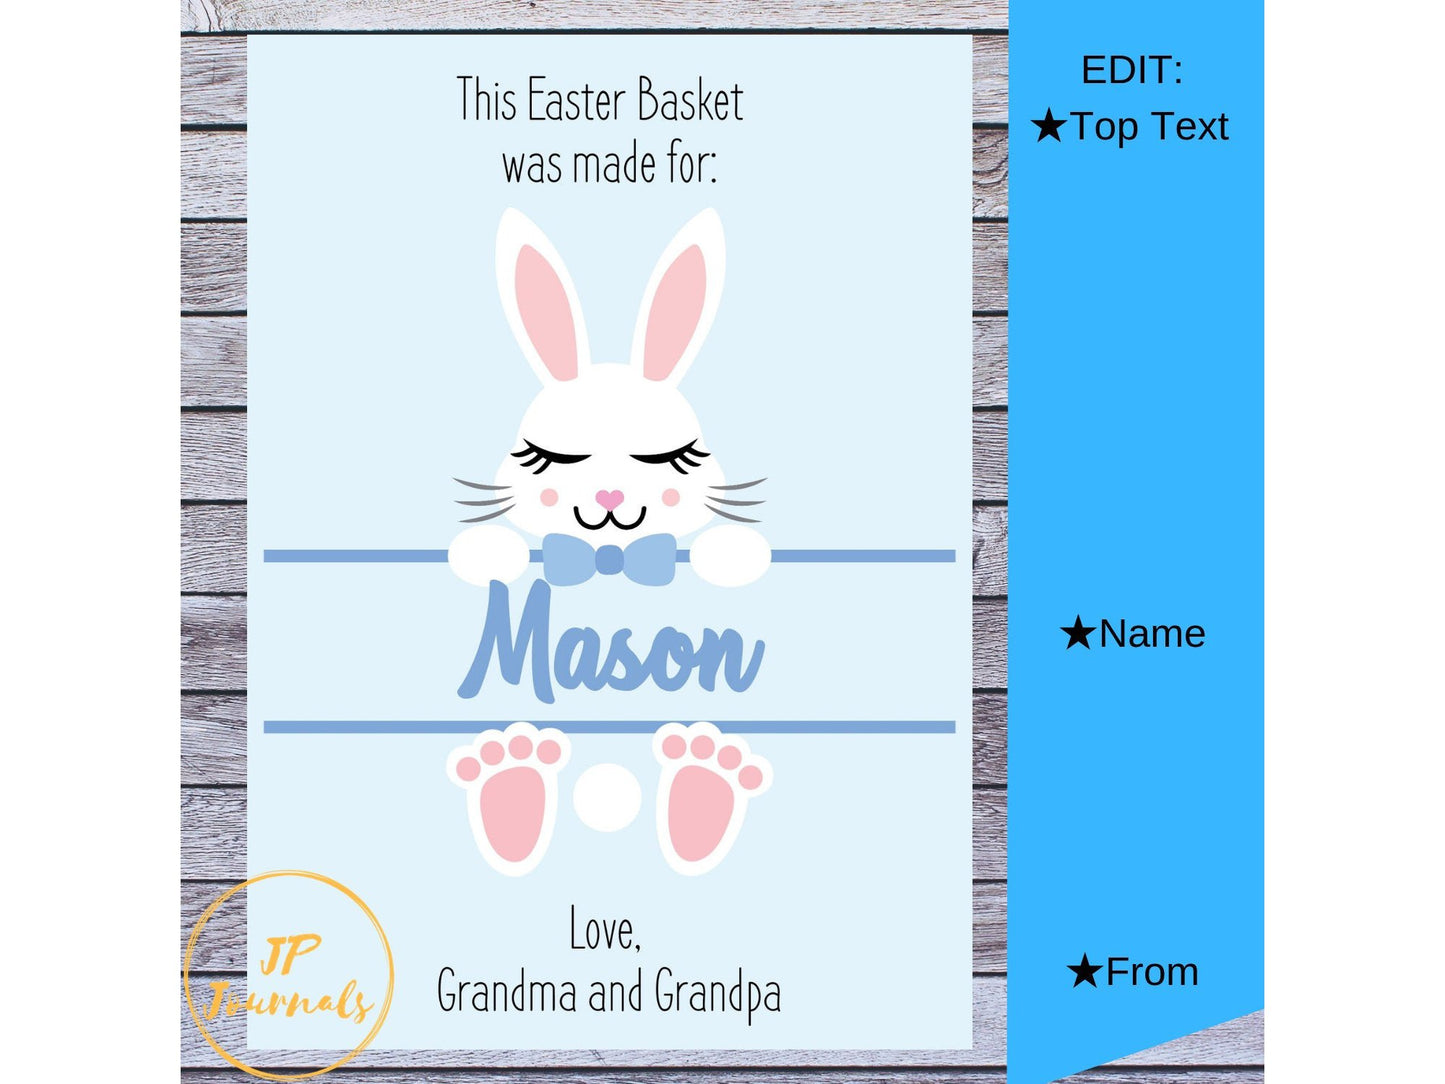 Easter Basket Label Tag Card - Printable  Edit &  Print at Home - Cute Boy Easter Bunny with Bow-Tie - Customized Easter Basket Tag for Boys